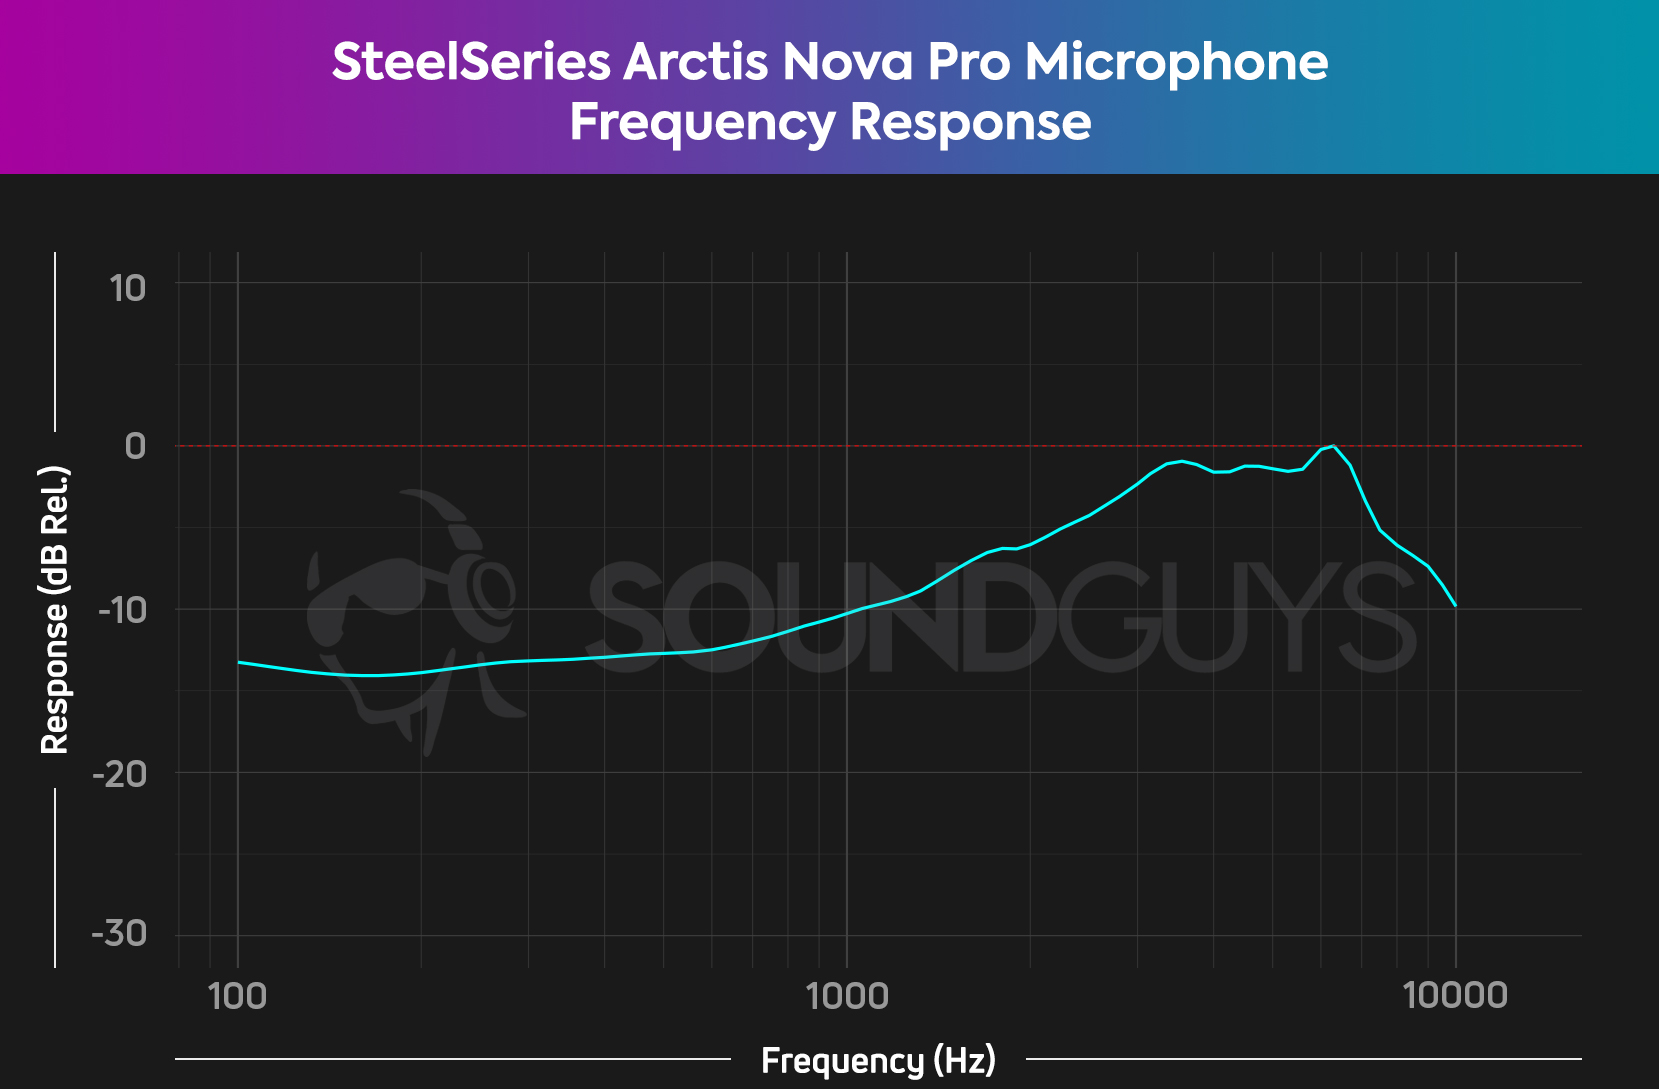 A frequency response chart for the SteelSeries Arctis Nova Pro microphone, which shows a notable lack of emphasis in bass range sound.